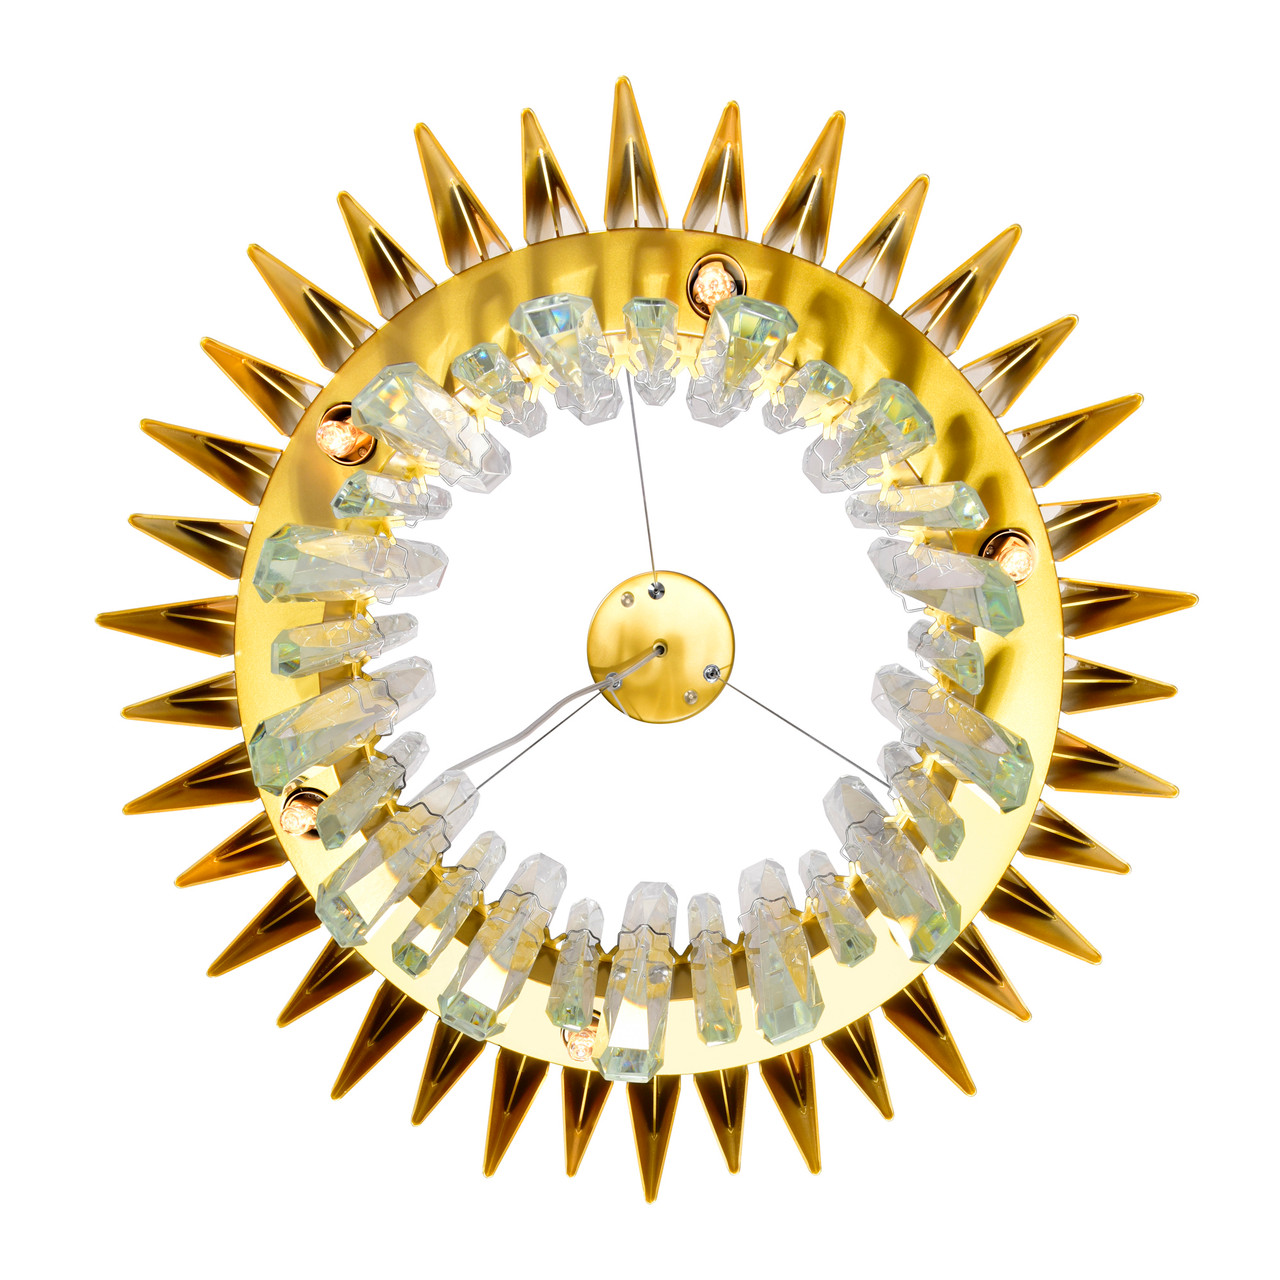 CWI LIGHTING 1247P20-12-602 12 Light Chandelier with Satin Gold finish